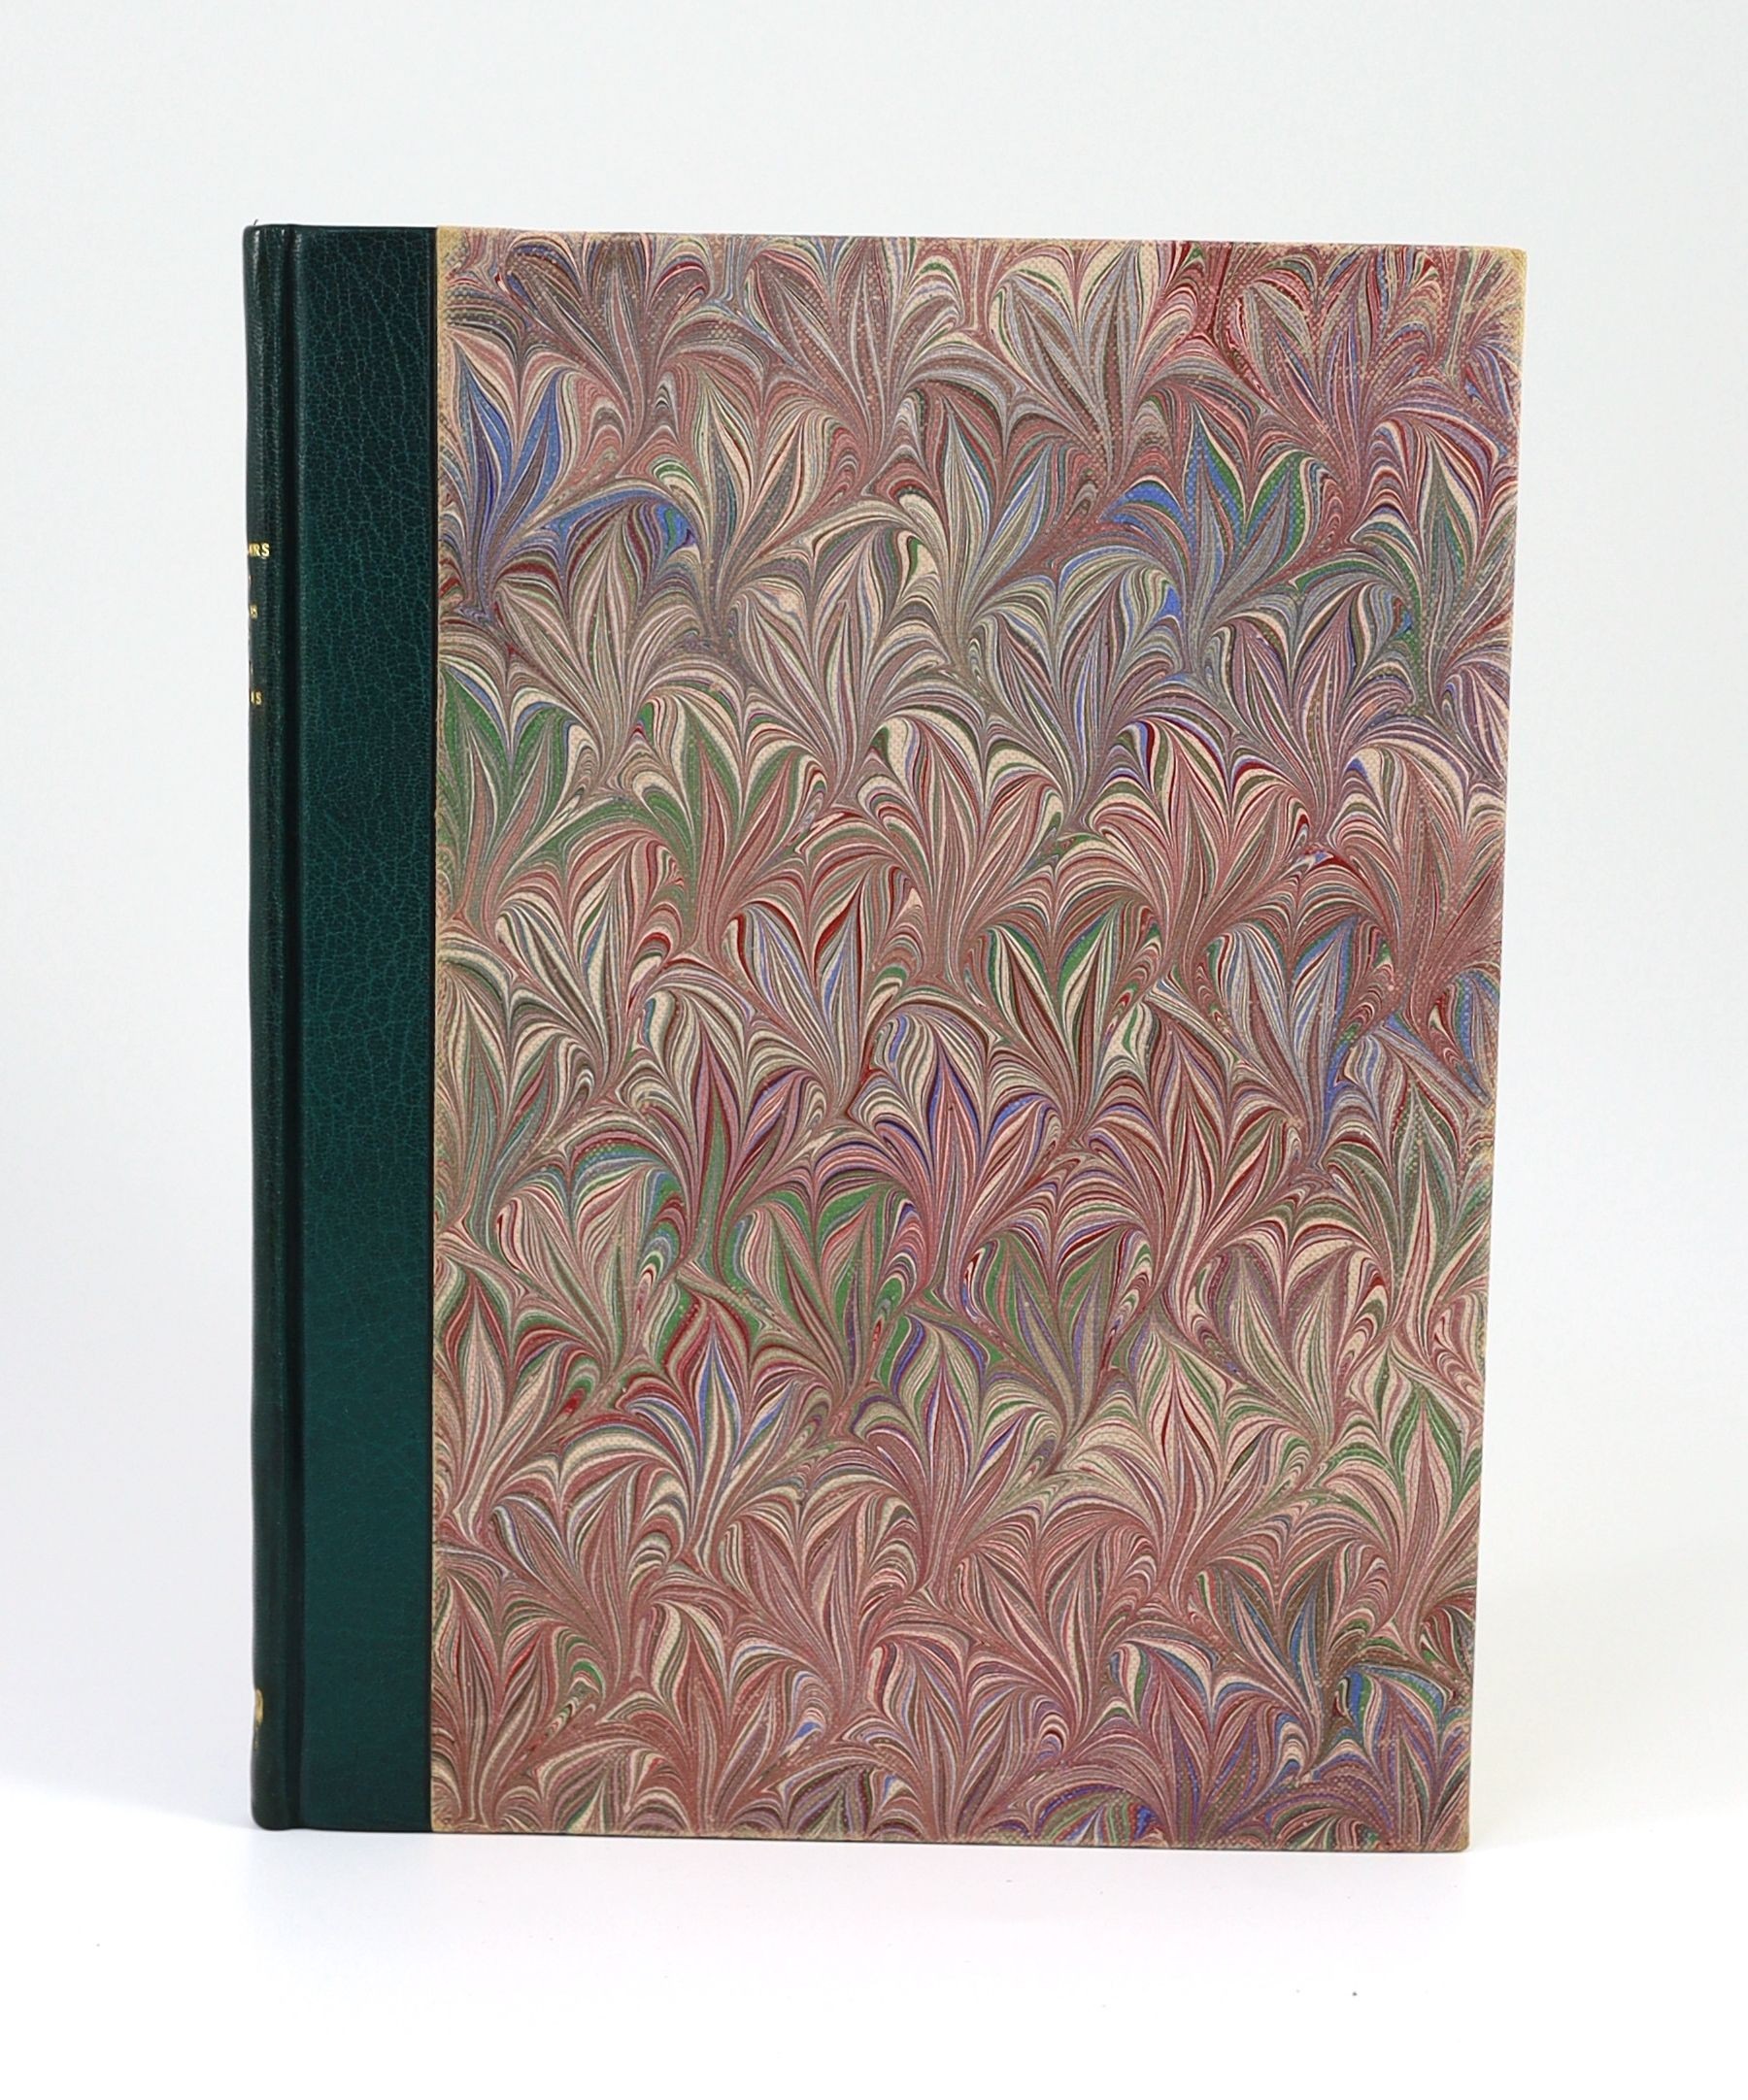 Golden Cockerel Press - Bates, Herbert Ernest - Flowers and Faces, one of 325, signed by the author, illustrated by John Nash, with engraved title and 4 fullpage wood-engravings, 4to, quarter green morocco with marbled p